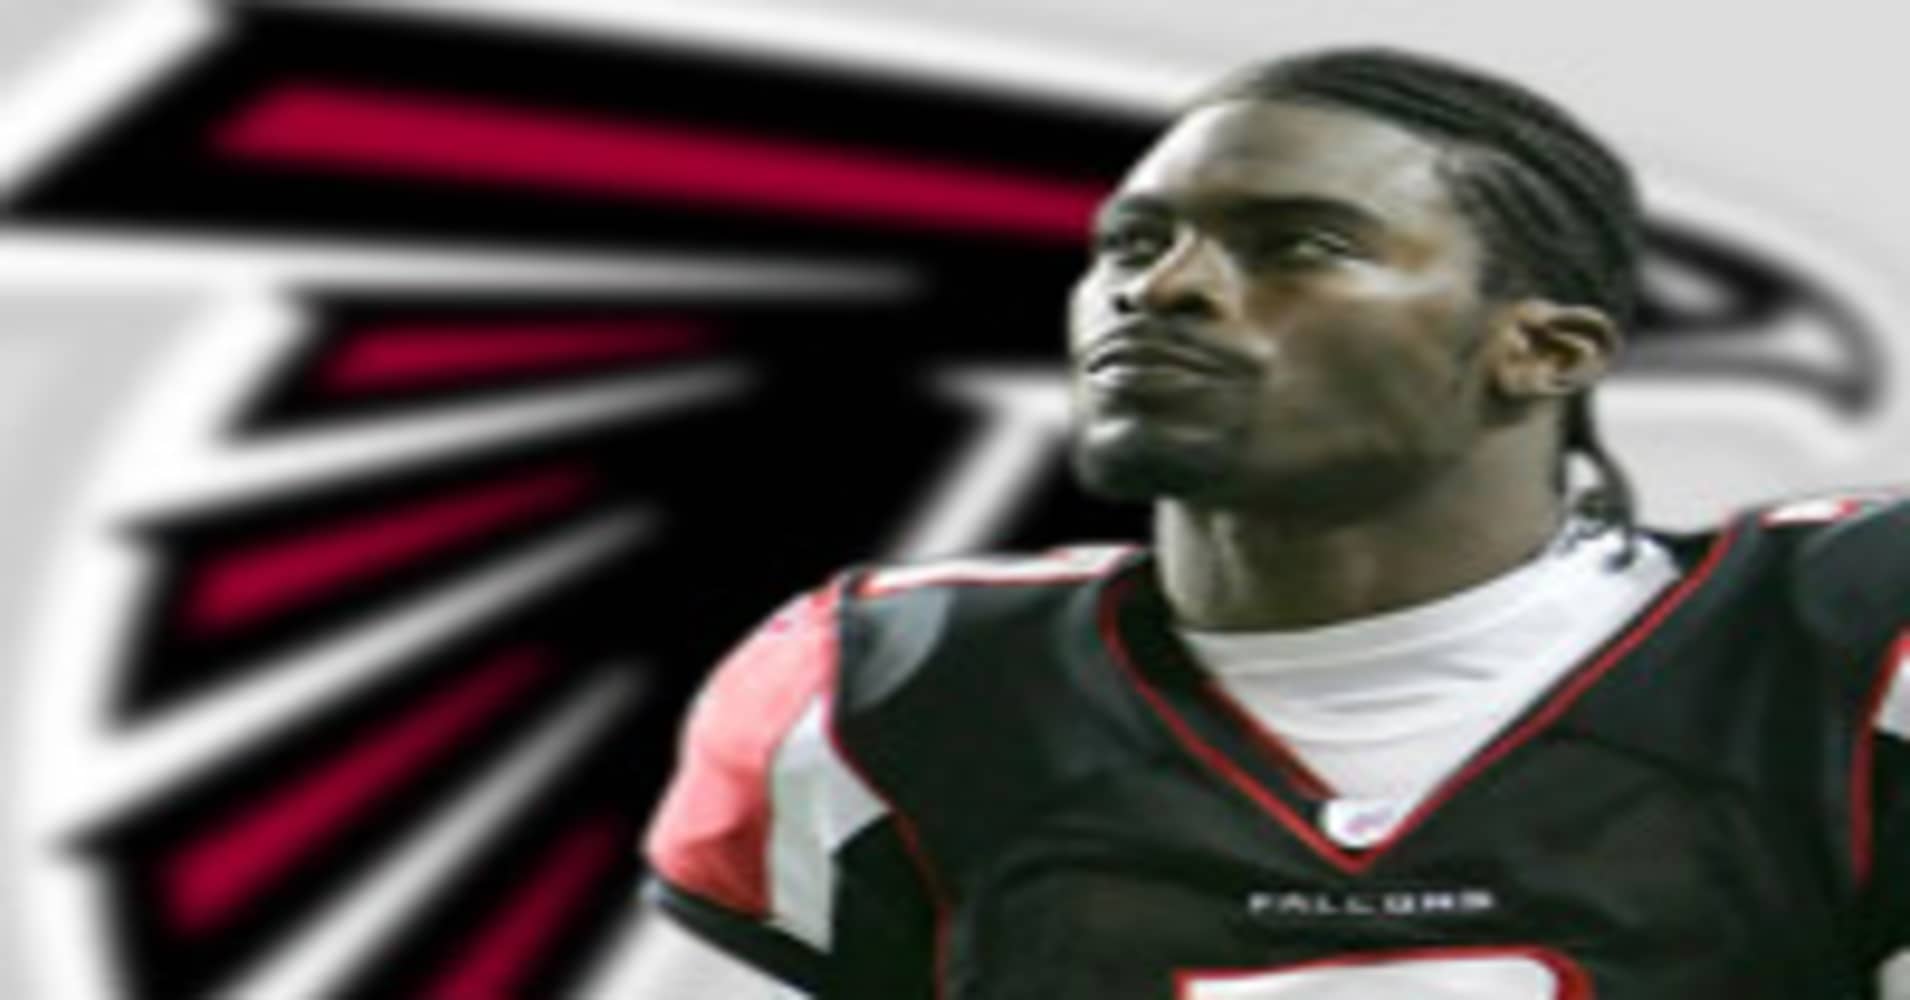 Nike Suspends Michael Vick Shoe Right Step To Take? (Update)